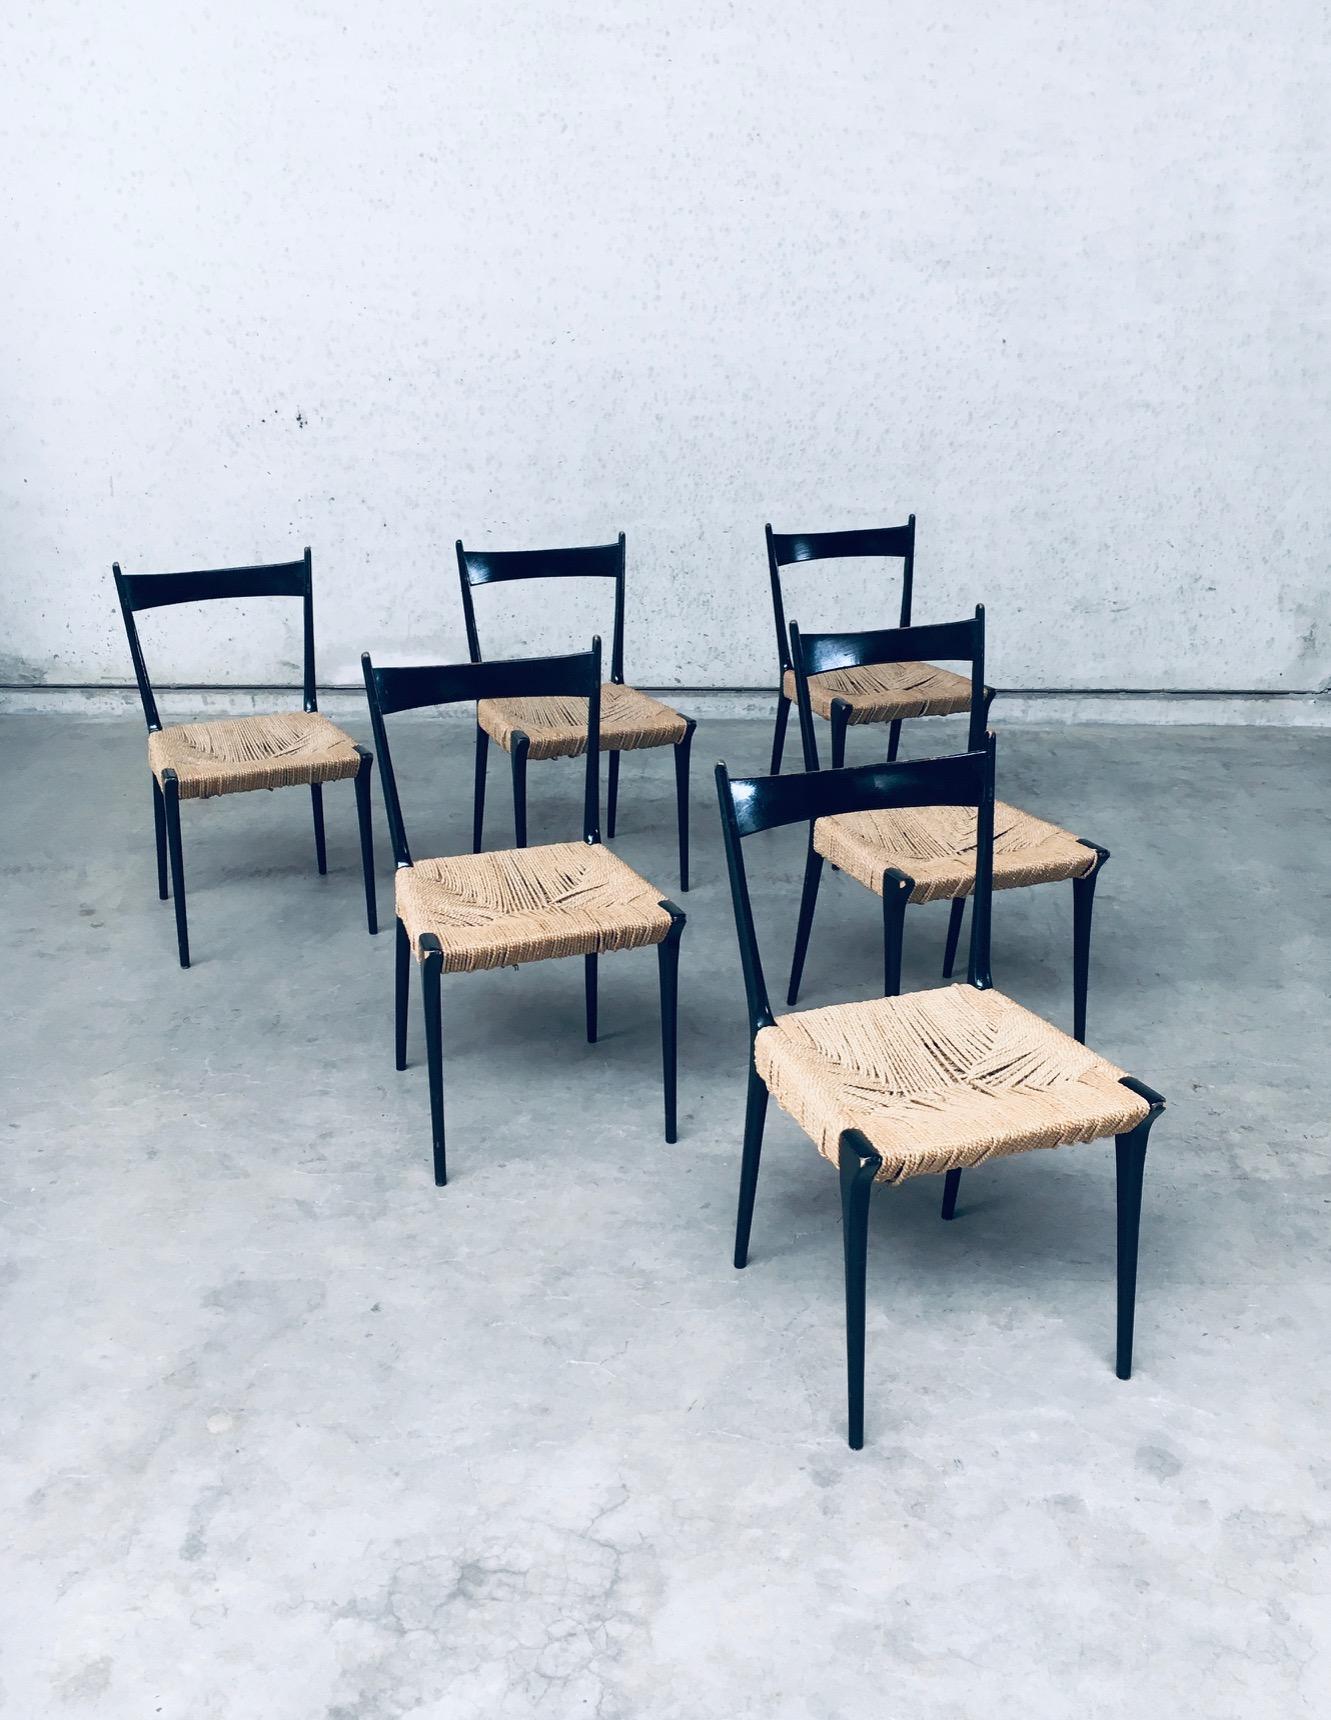 Vintage Midcentury Modern Belgian Design S11 Model Dining Chair set of 6 by Alfred Hendrickx for Belform, made in Belgium 1950's. Wonderful designed chairs in black stained beech wood and danish seagrass woven seats. All original condition. The